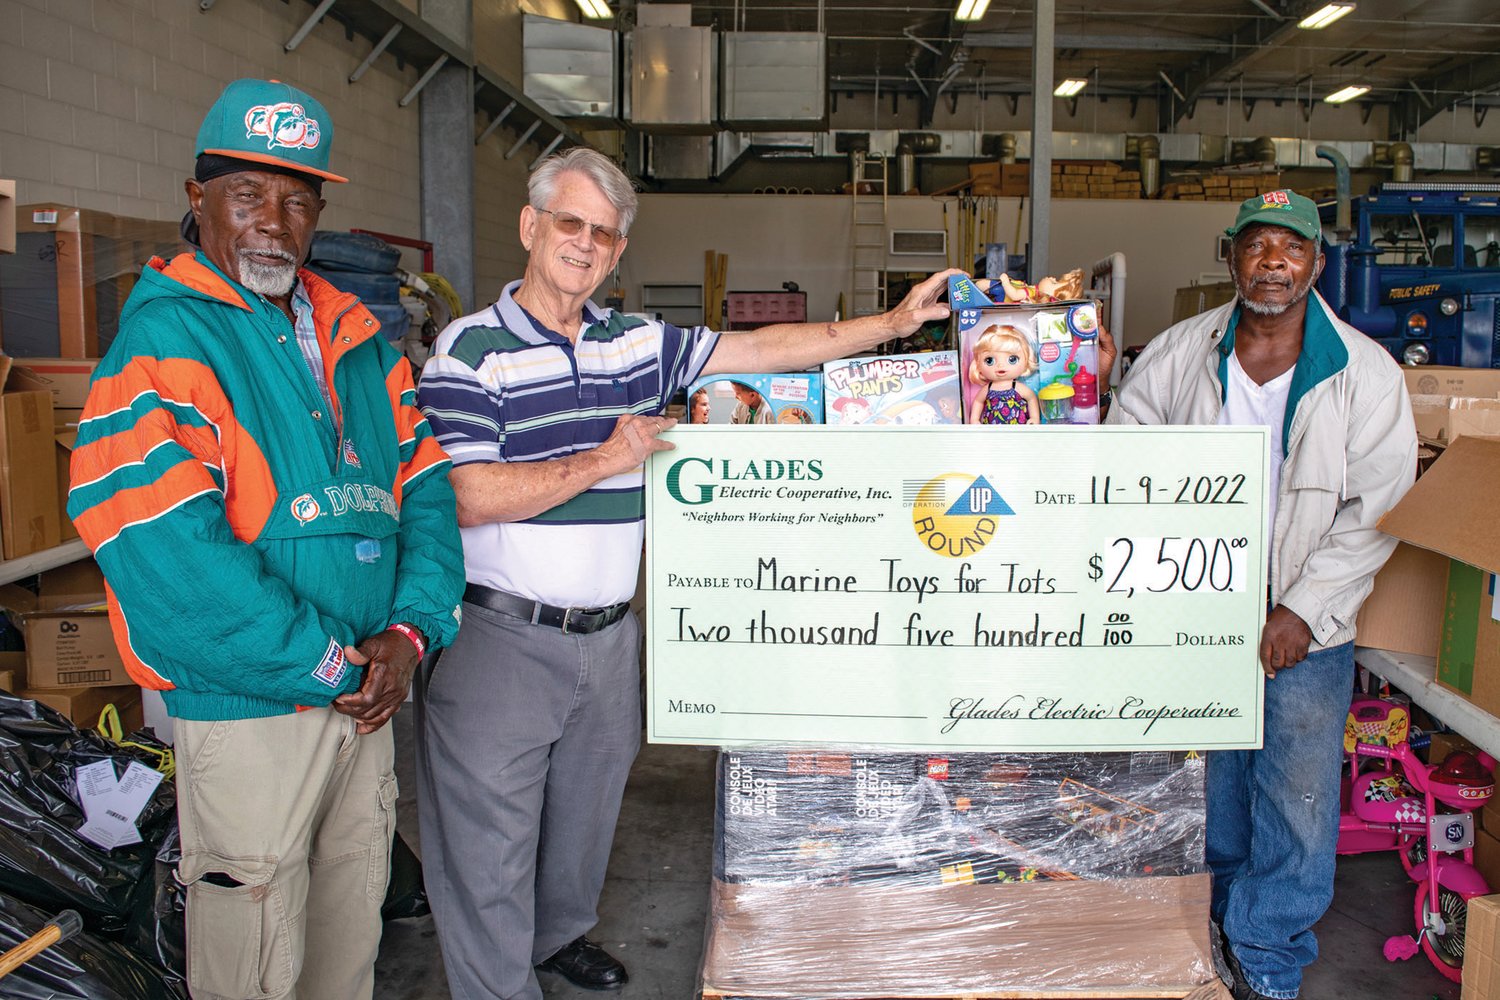 Left to right: Duke Williams, Joe Hosick, and Johnnie Marshall accept a check for Marine Toys for Tots. Joe has served as the coordinator for Toys for Tots in Glades and Hendry counties for 11 years. Duke and Johnnie have been faithful volunteers and have assisted Joe with this program.